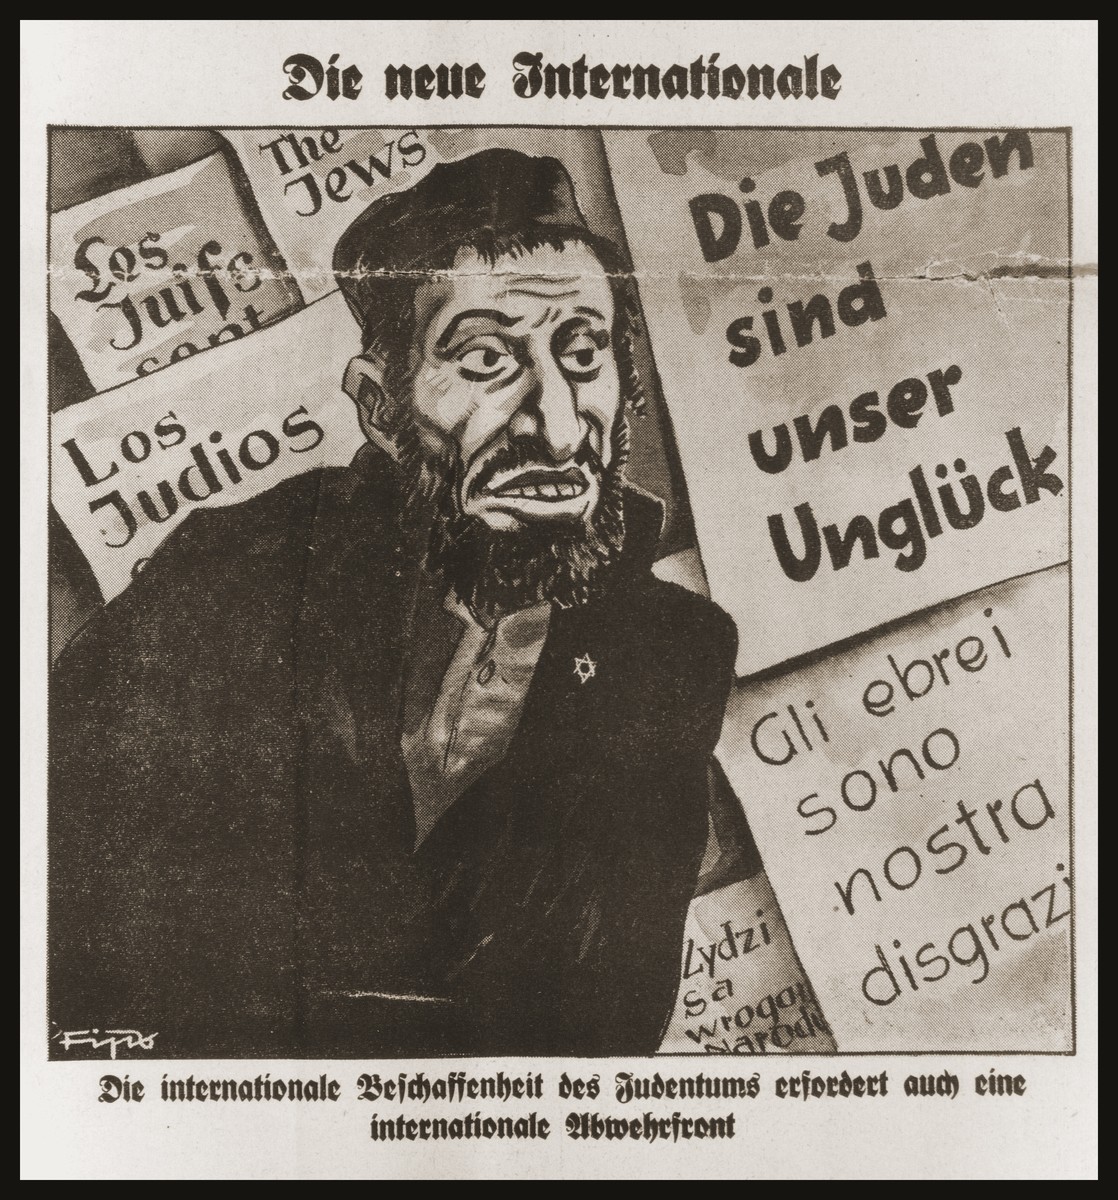 Caricature on the front page of the Nazi publication, Der Stuermer, depicting world Jewry as a "new International."  The  caption reads, "The new internationale/The international composition of Jewry demands an international defense front."